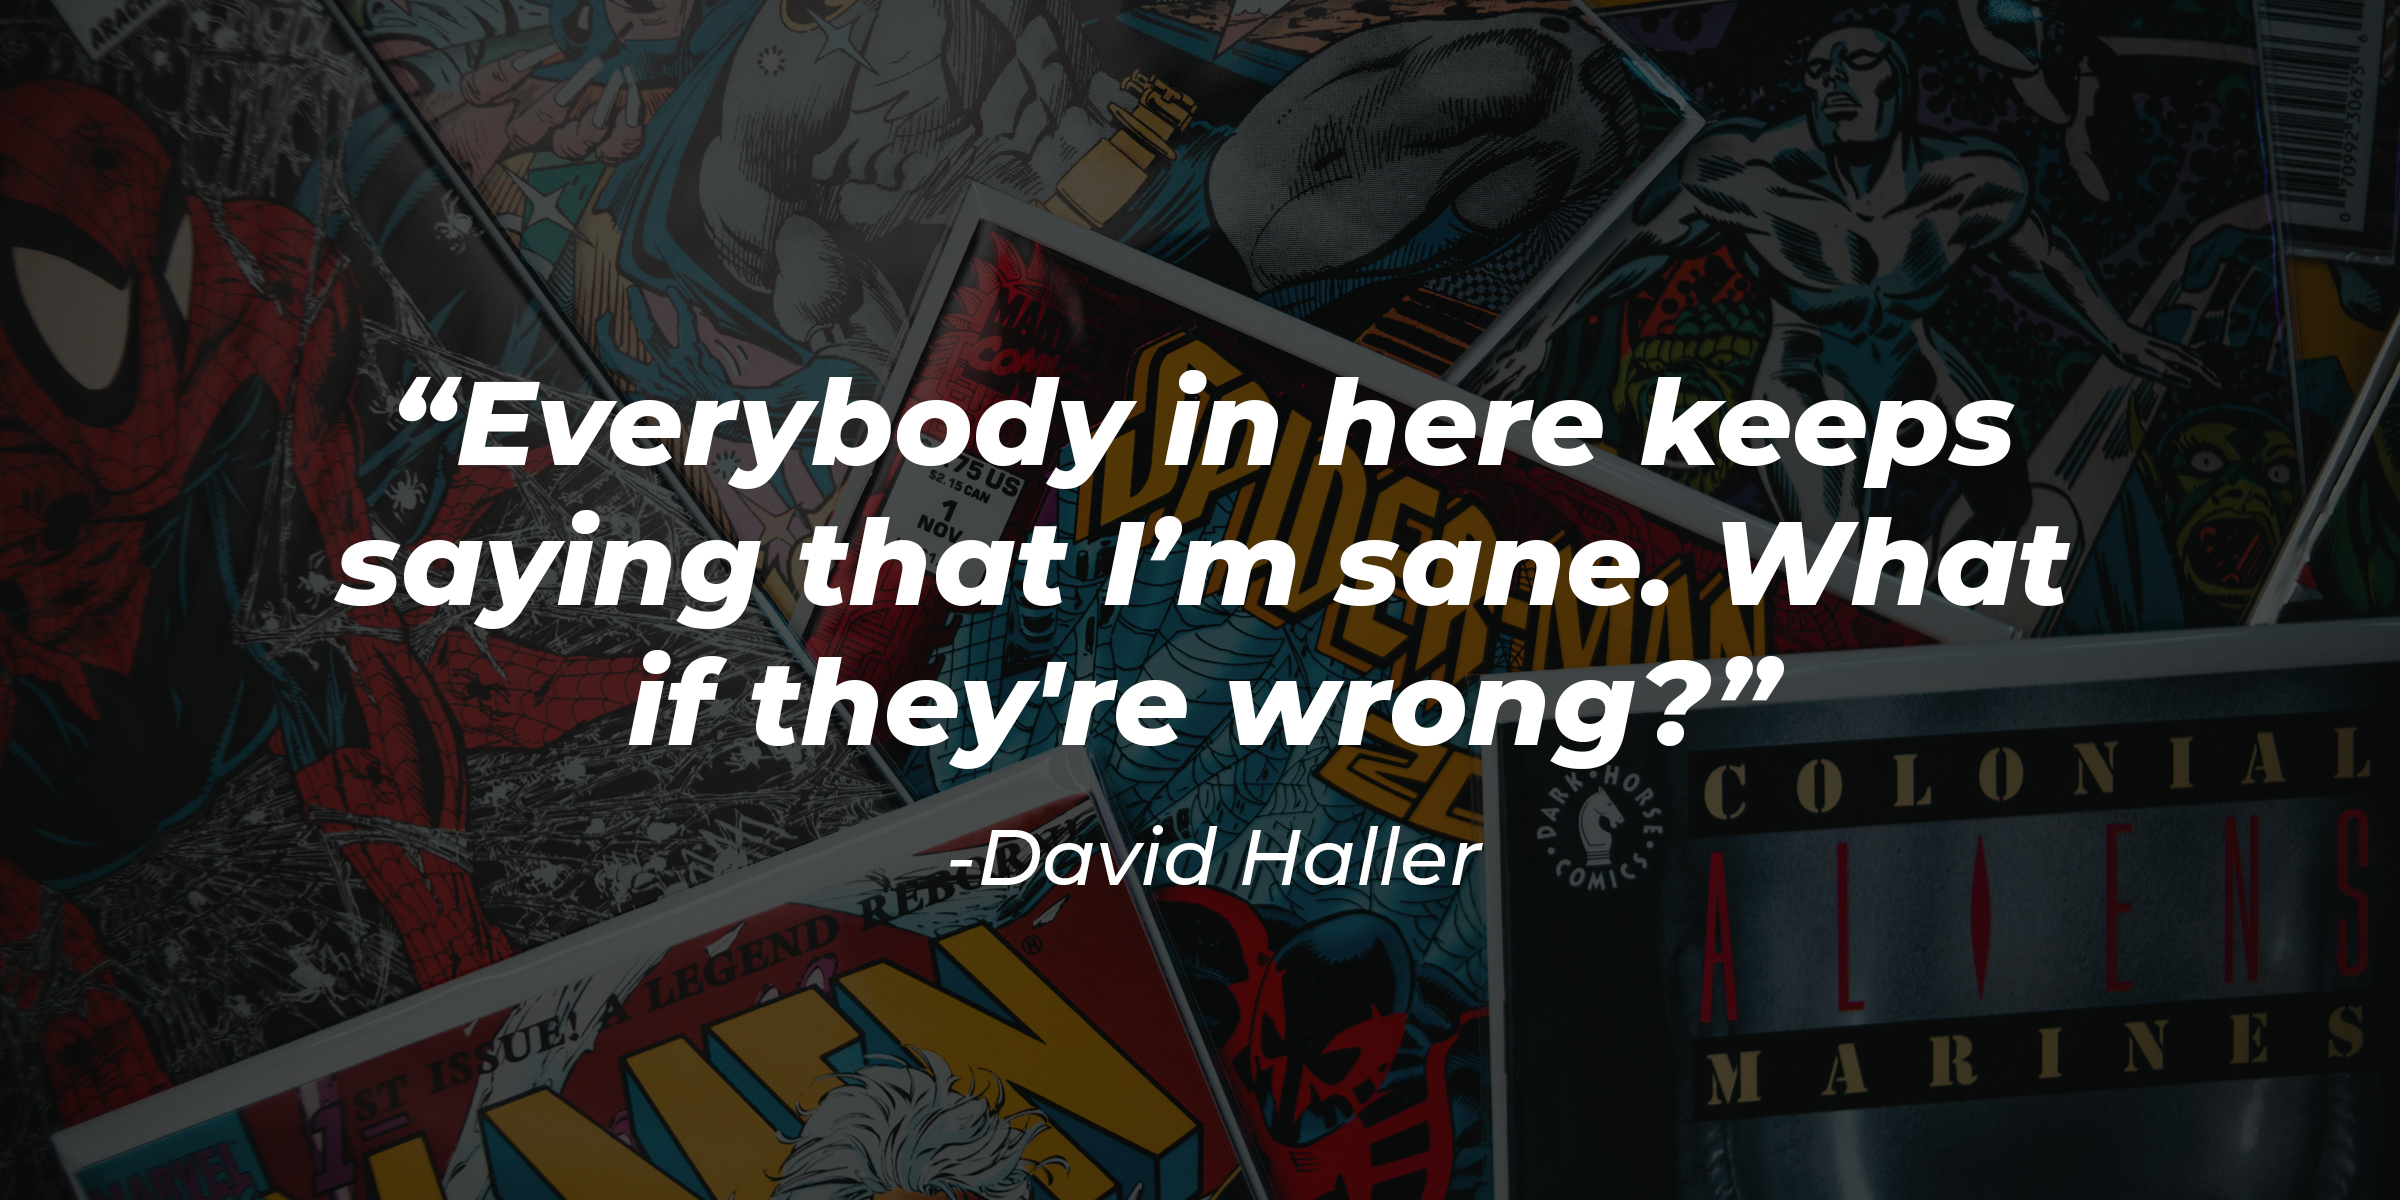 Source: Unsplash | A spread of Marvel comics with the quote, “Everybody in here keeps saying that I’m sane. What if they're wrong?” by David Haller